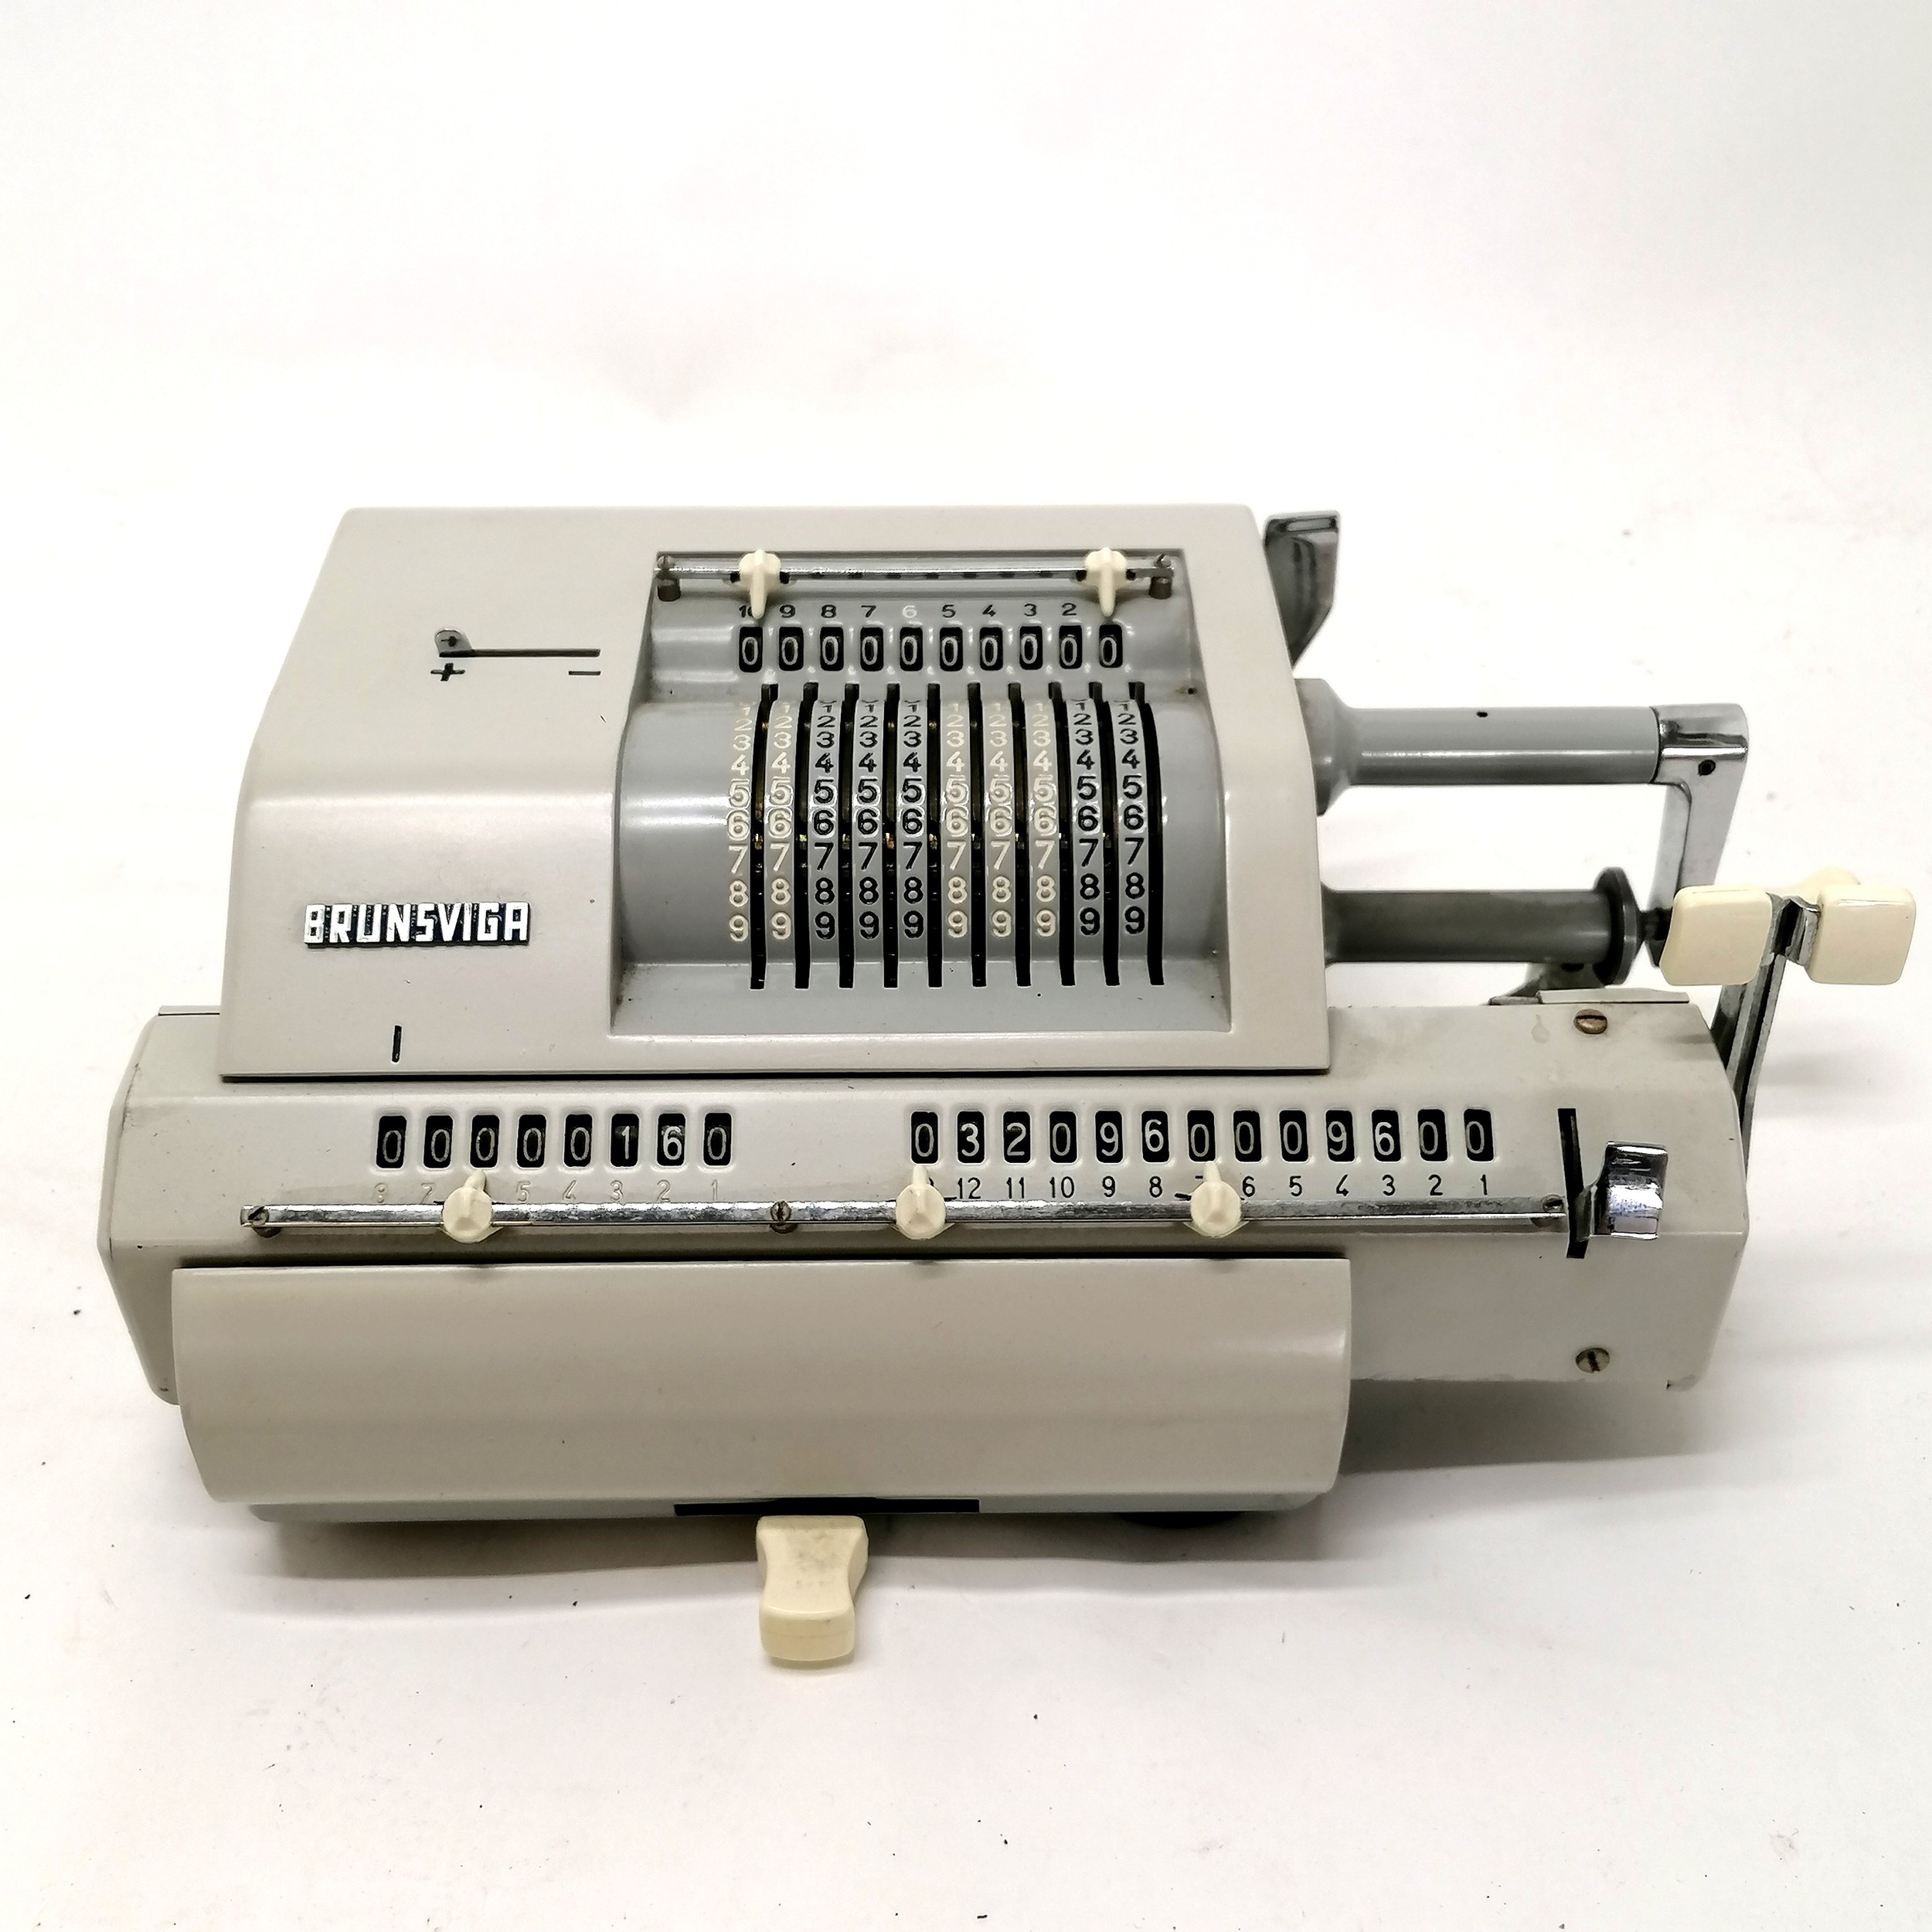 Brunsviga vintage calculating machine T/W a large scale numerical interchangeable stamp 28cm long. - Image 2 of 4